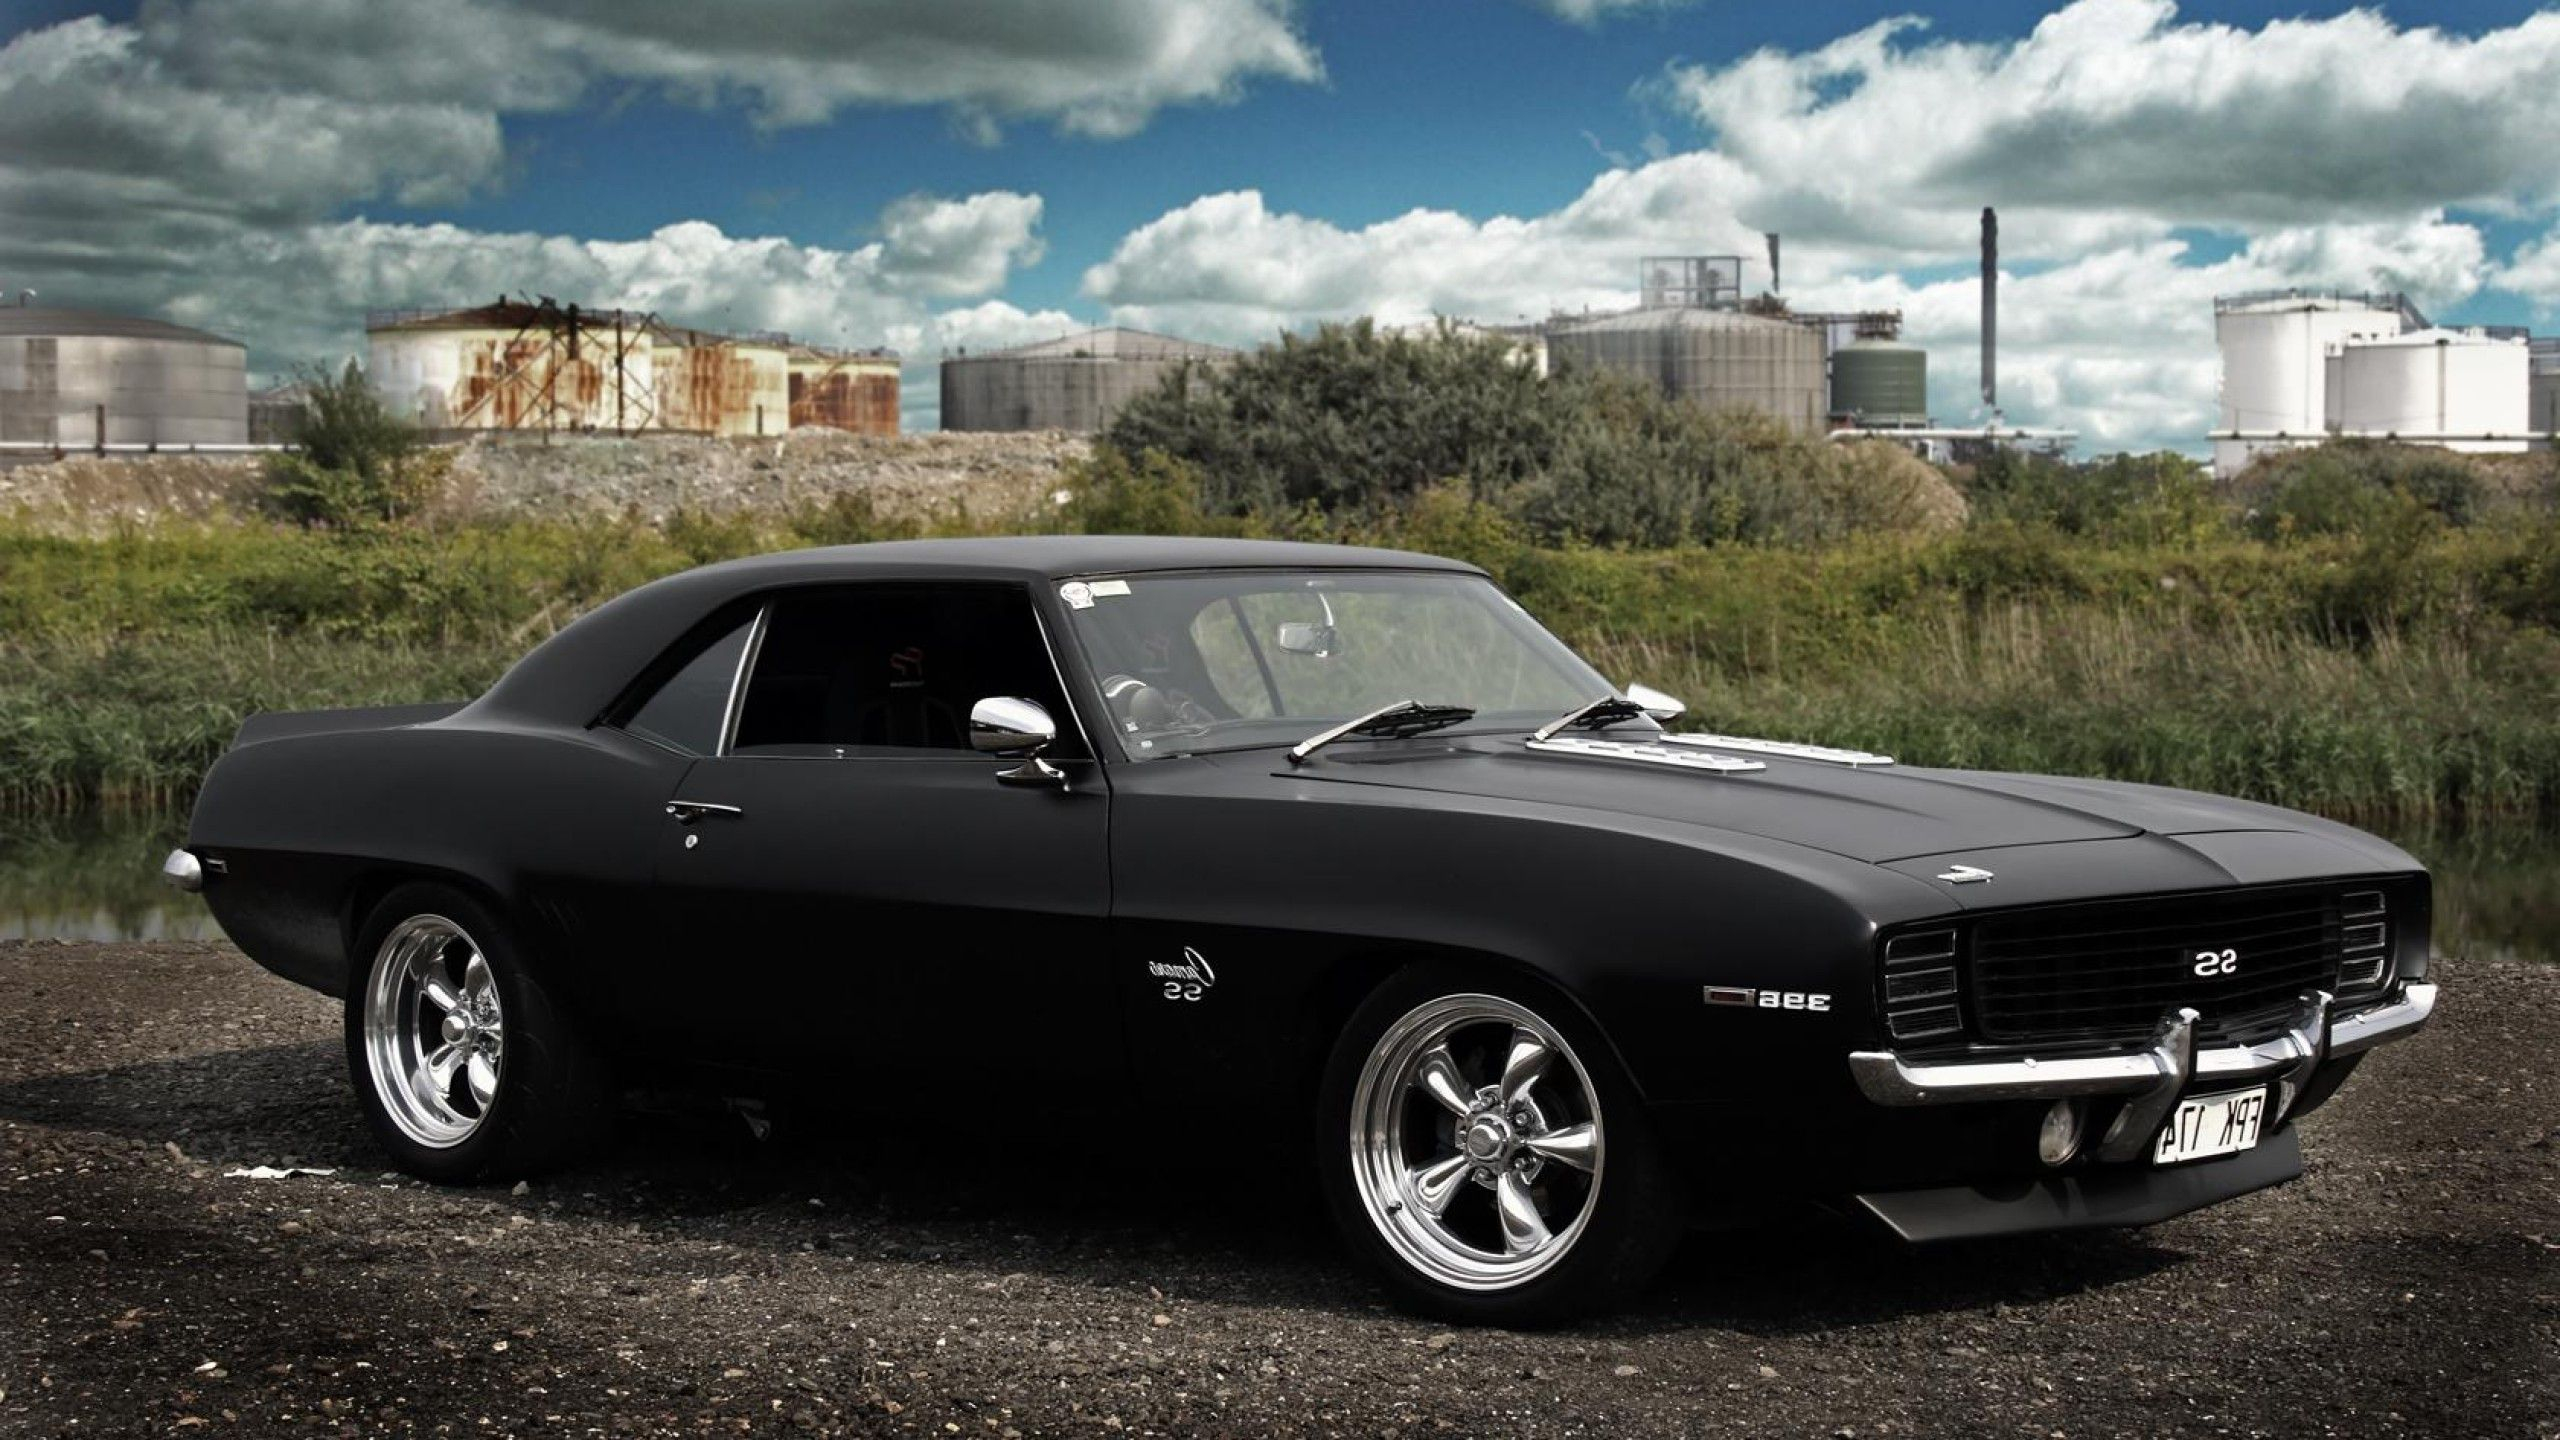 2560x1440 Dodge Muscle Car Wallpapers Top Free Dodge Muscle Car Backgrounds